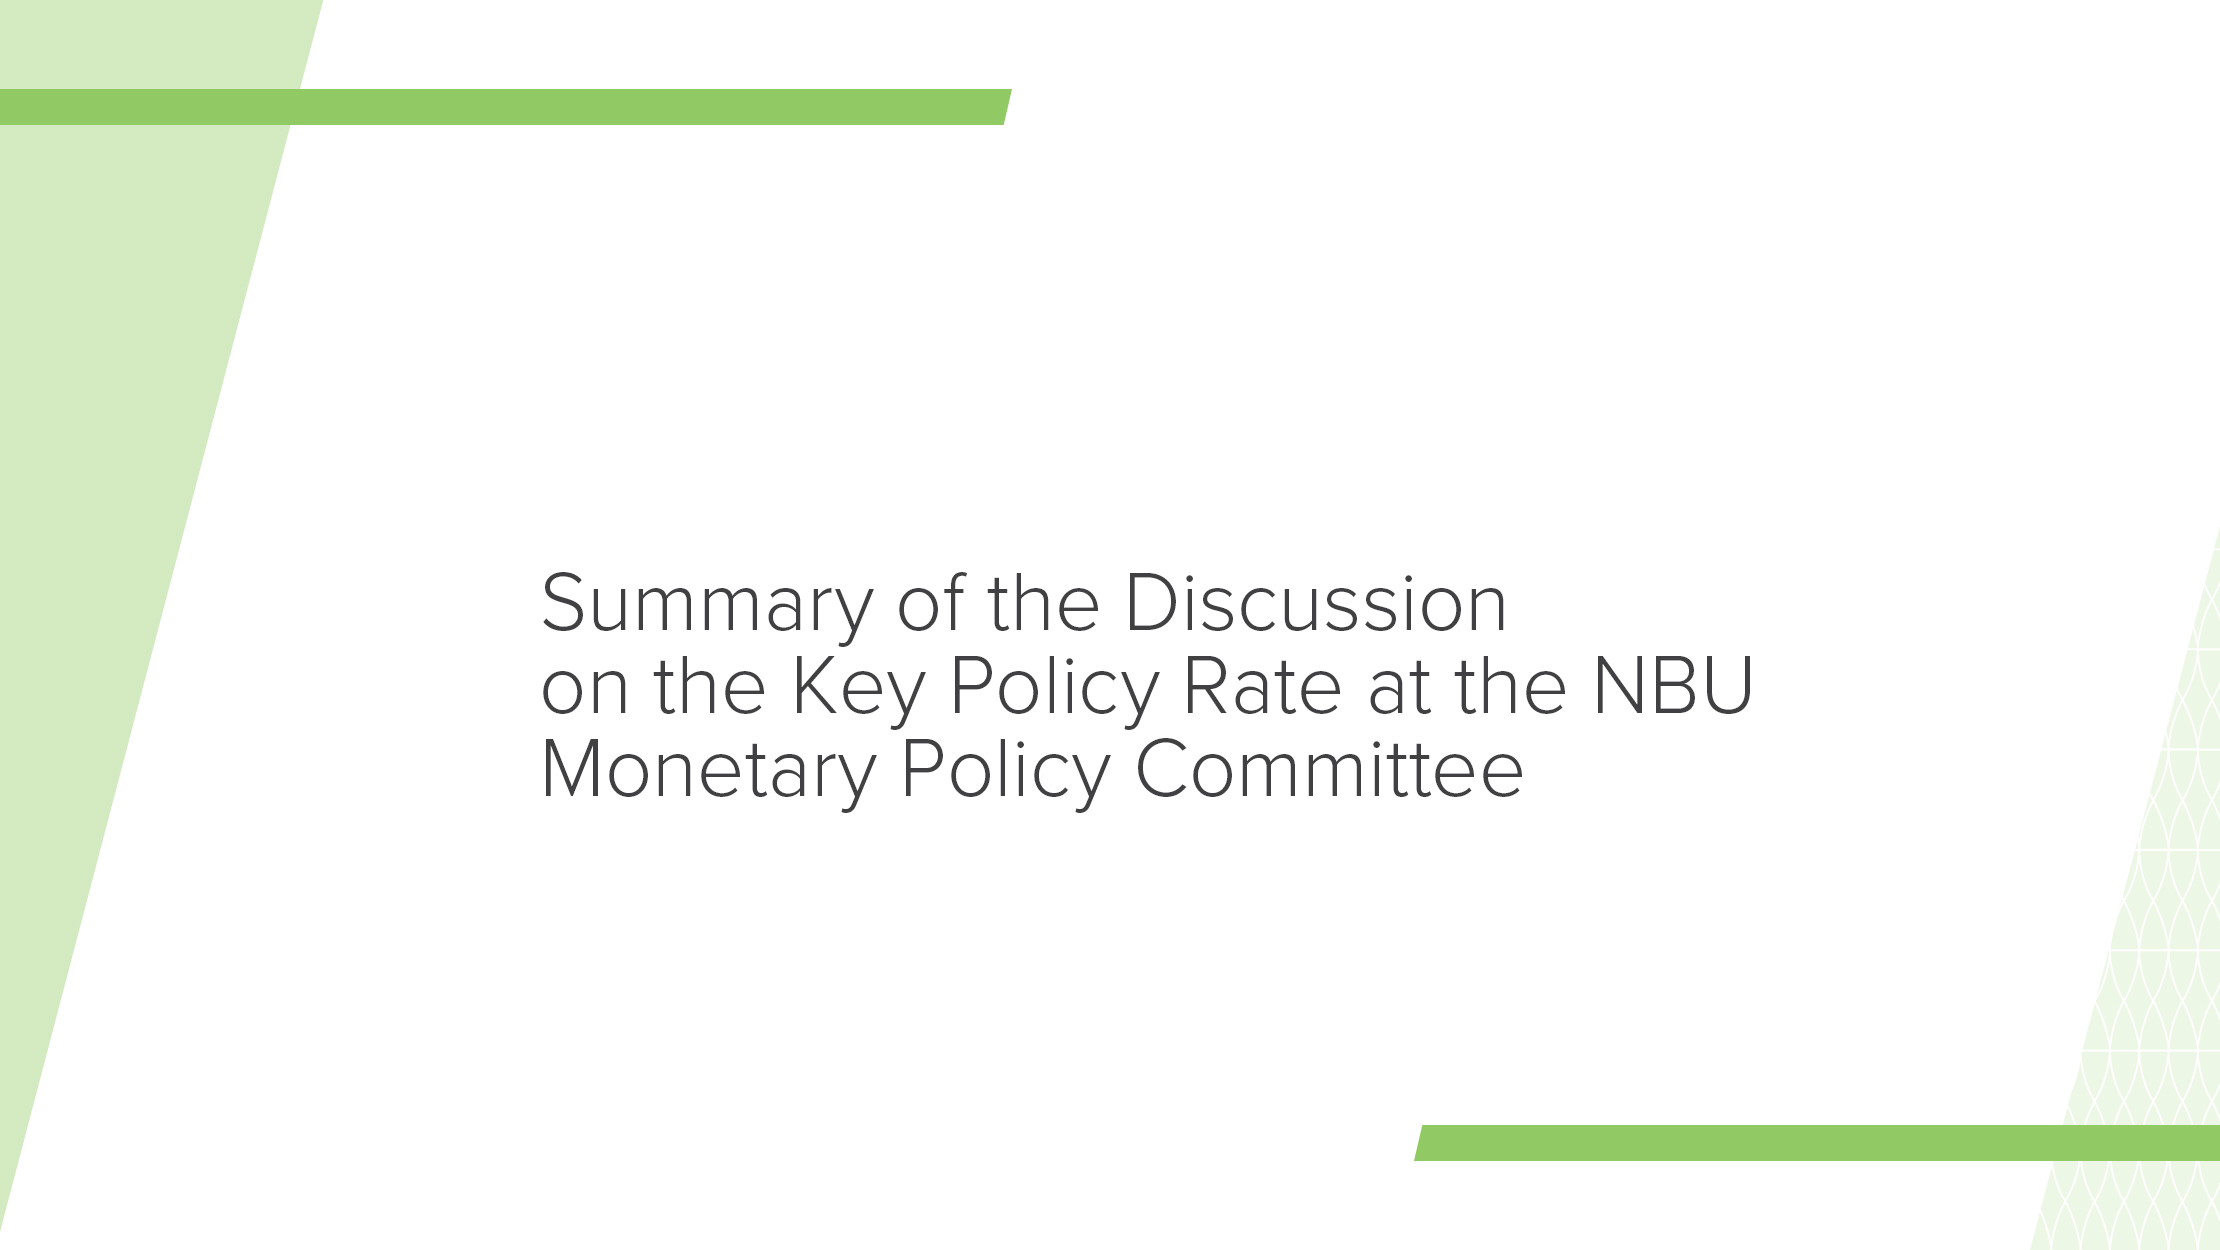 Summary of Key Policy Rate Discussion by NBU Monetary Policy Committee on 16 June 2021